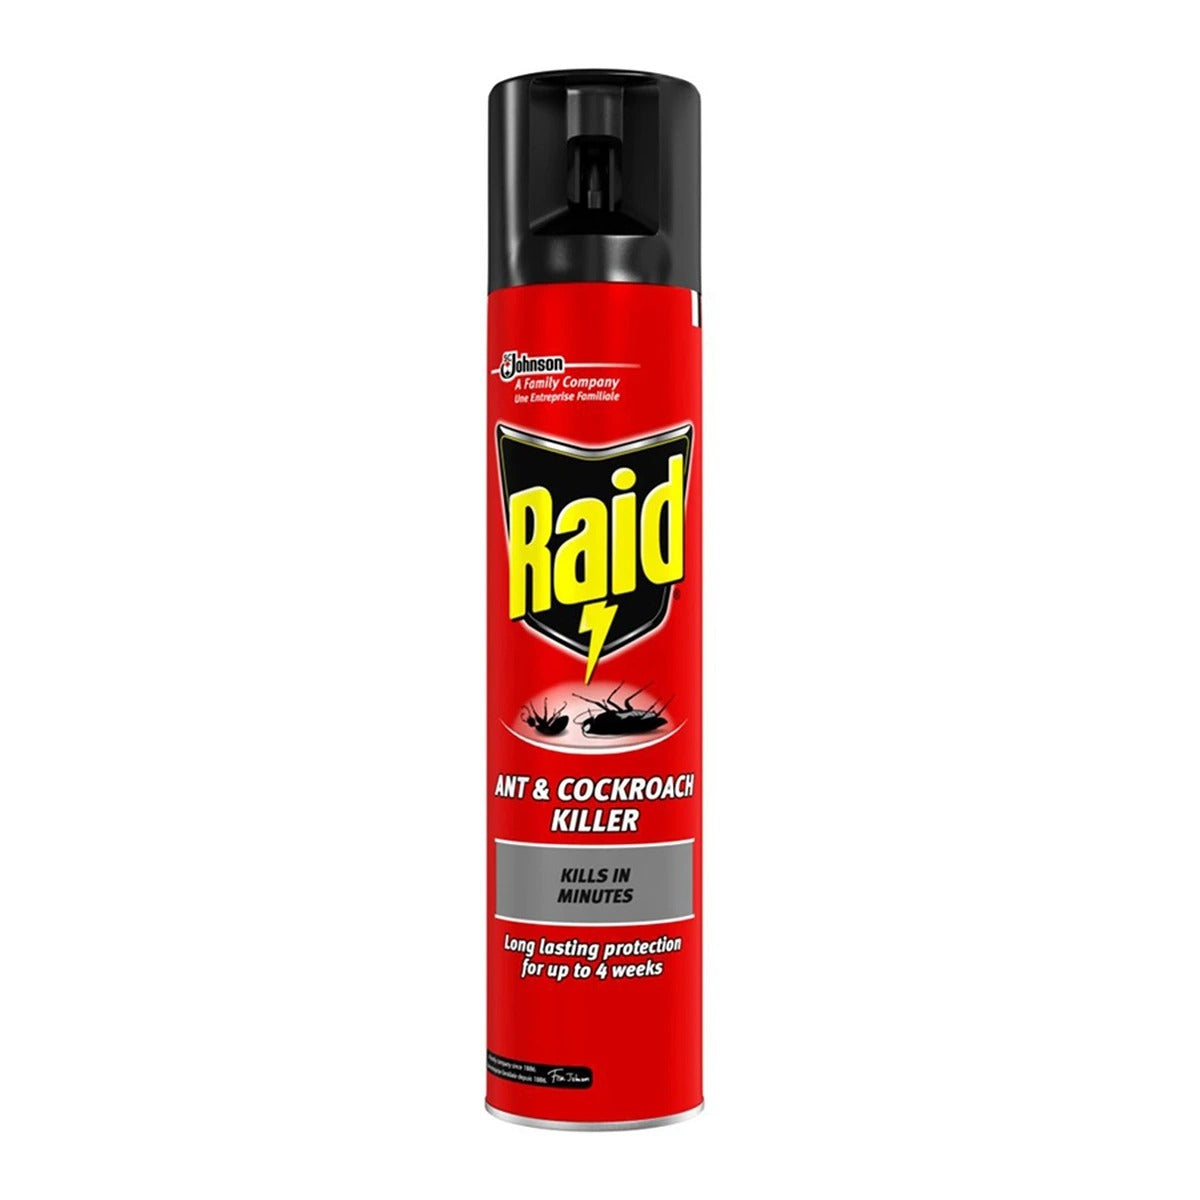 Raid - Ant & Cockroach Killer Spray - 300ml insect repellent spray on a white background.